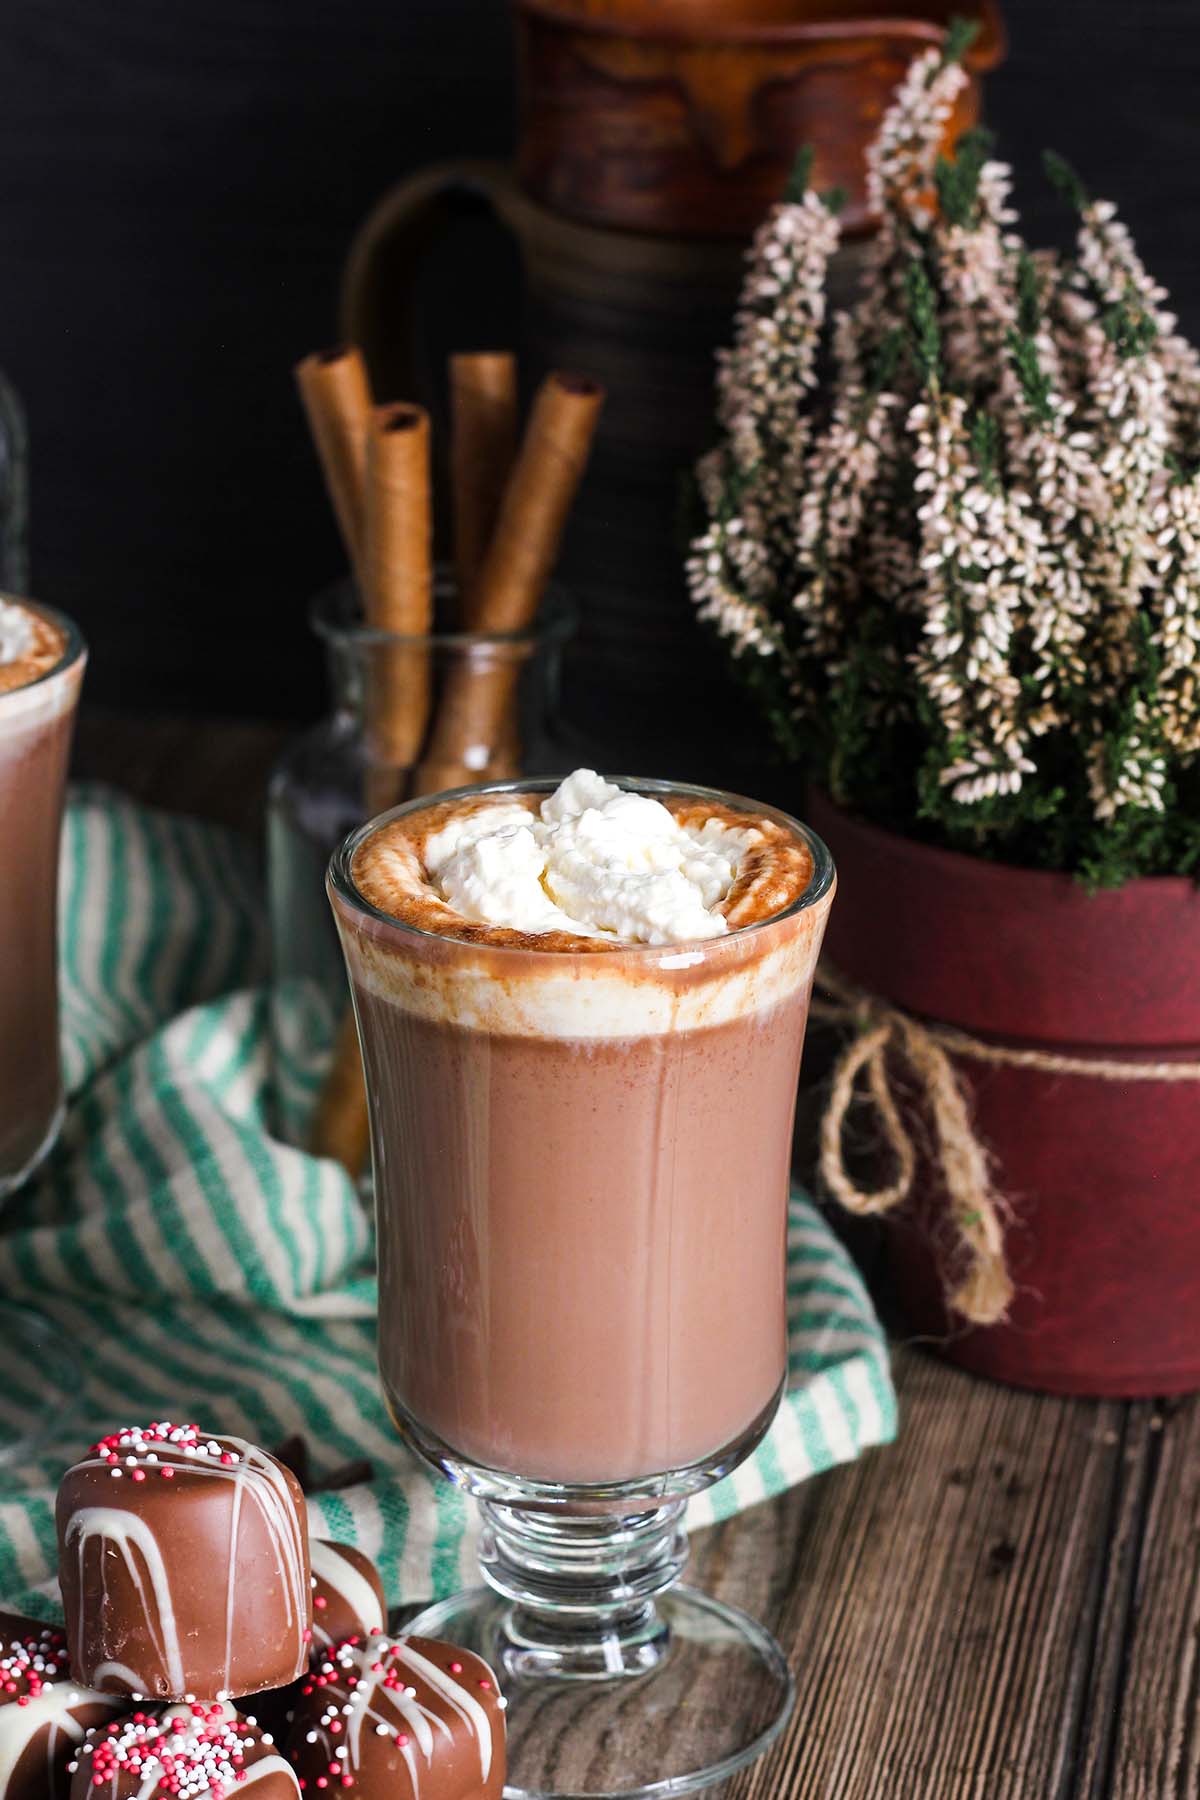 A glass of Amaretto hot chocolate next to a stack of chocolate covered marshmallows with a plant and a pitcher in the background.